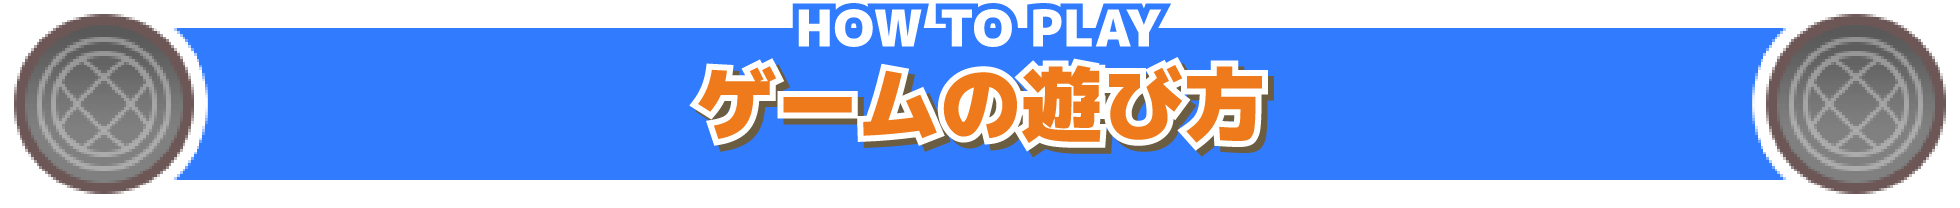 HOW TO PLAY ゲームの遊び方